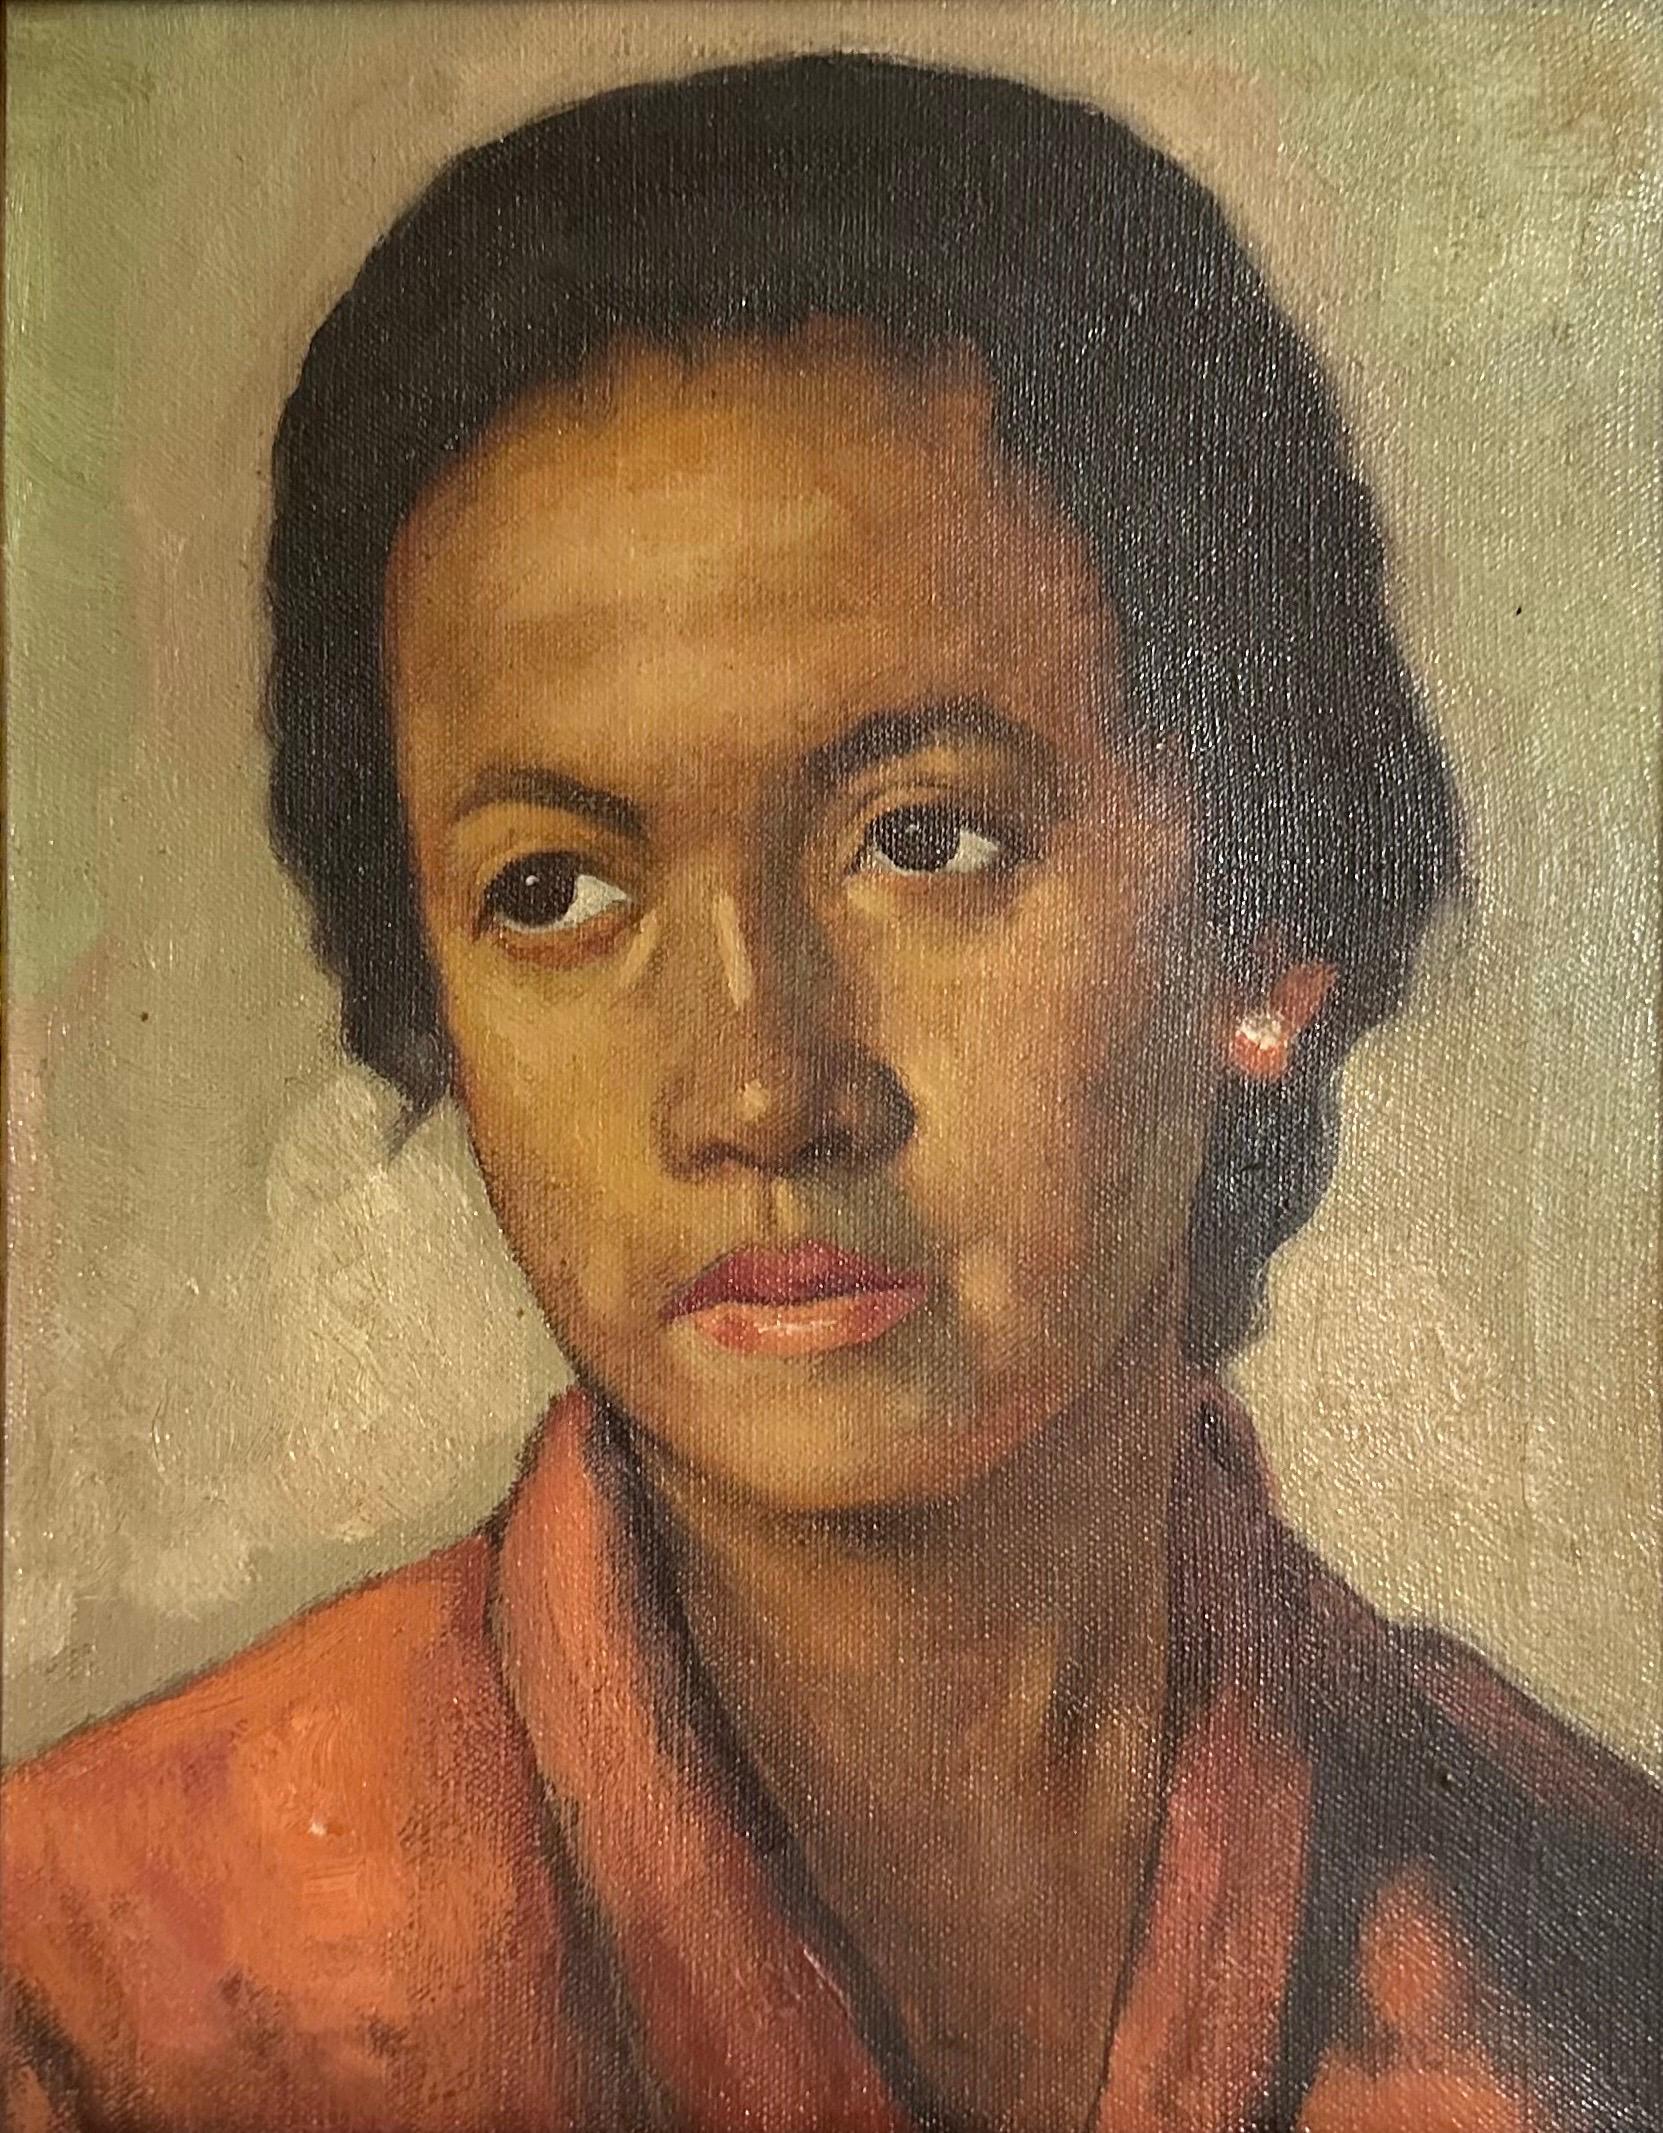 Early 20th Century Ashcan School Social Realist Portrait Women of Color

American Ashcan School portrait painting of a woman of color. The unattributed oil on canvas painting was created about 1925. This portrait depicts a young woman dressed in red